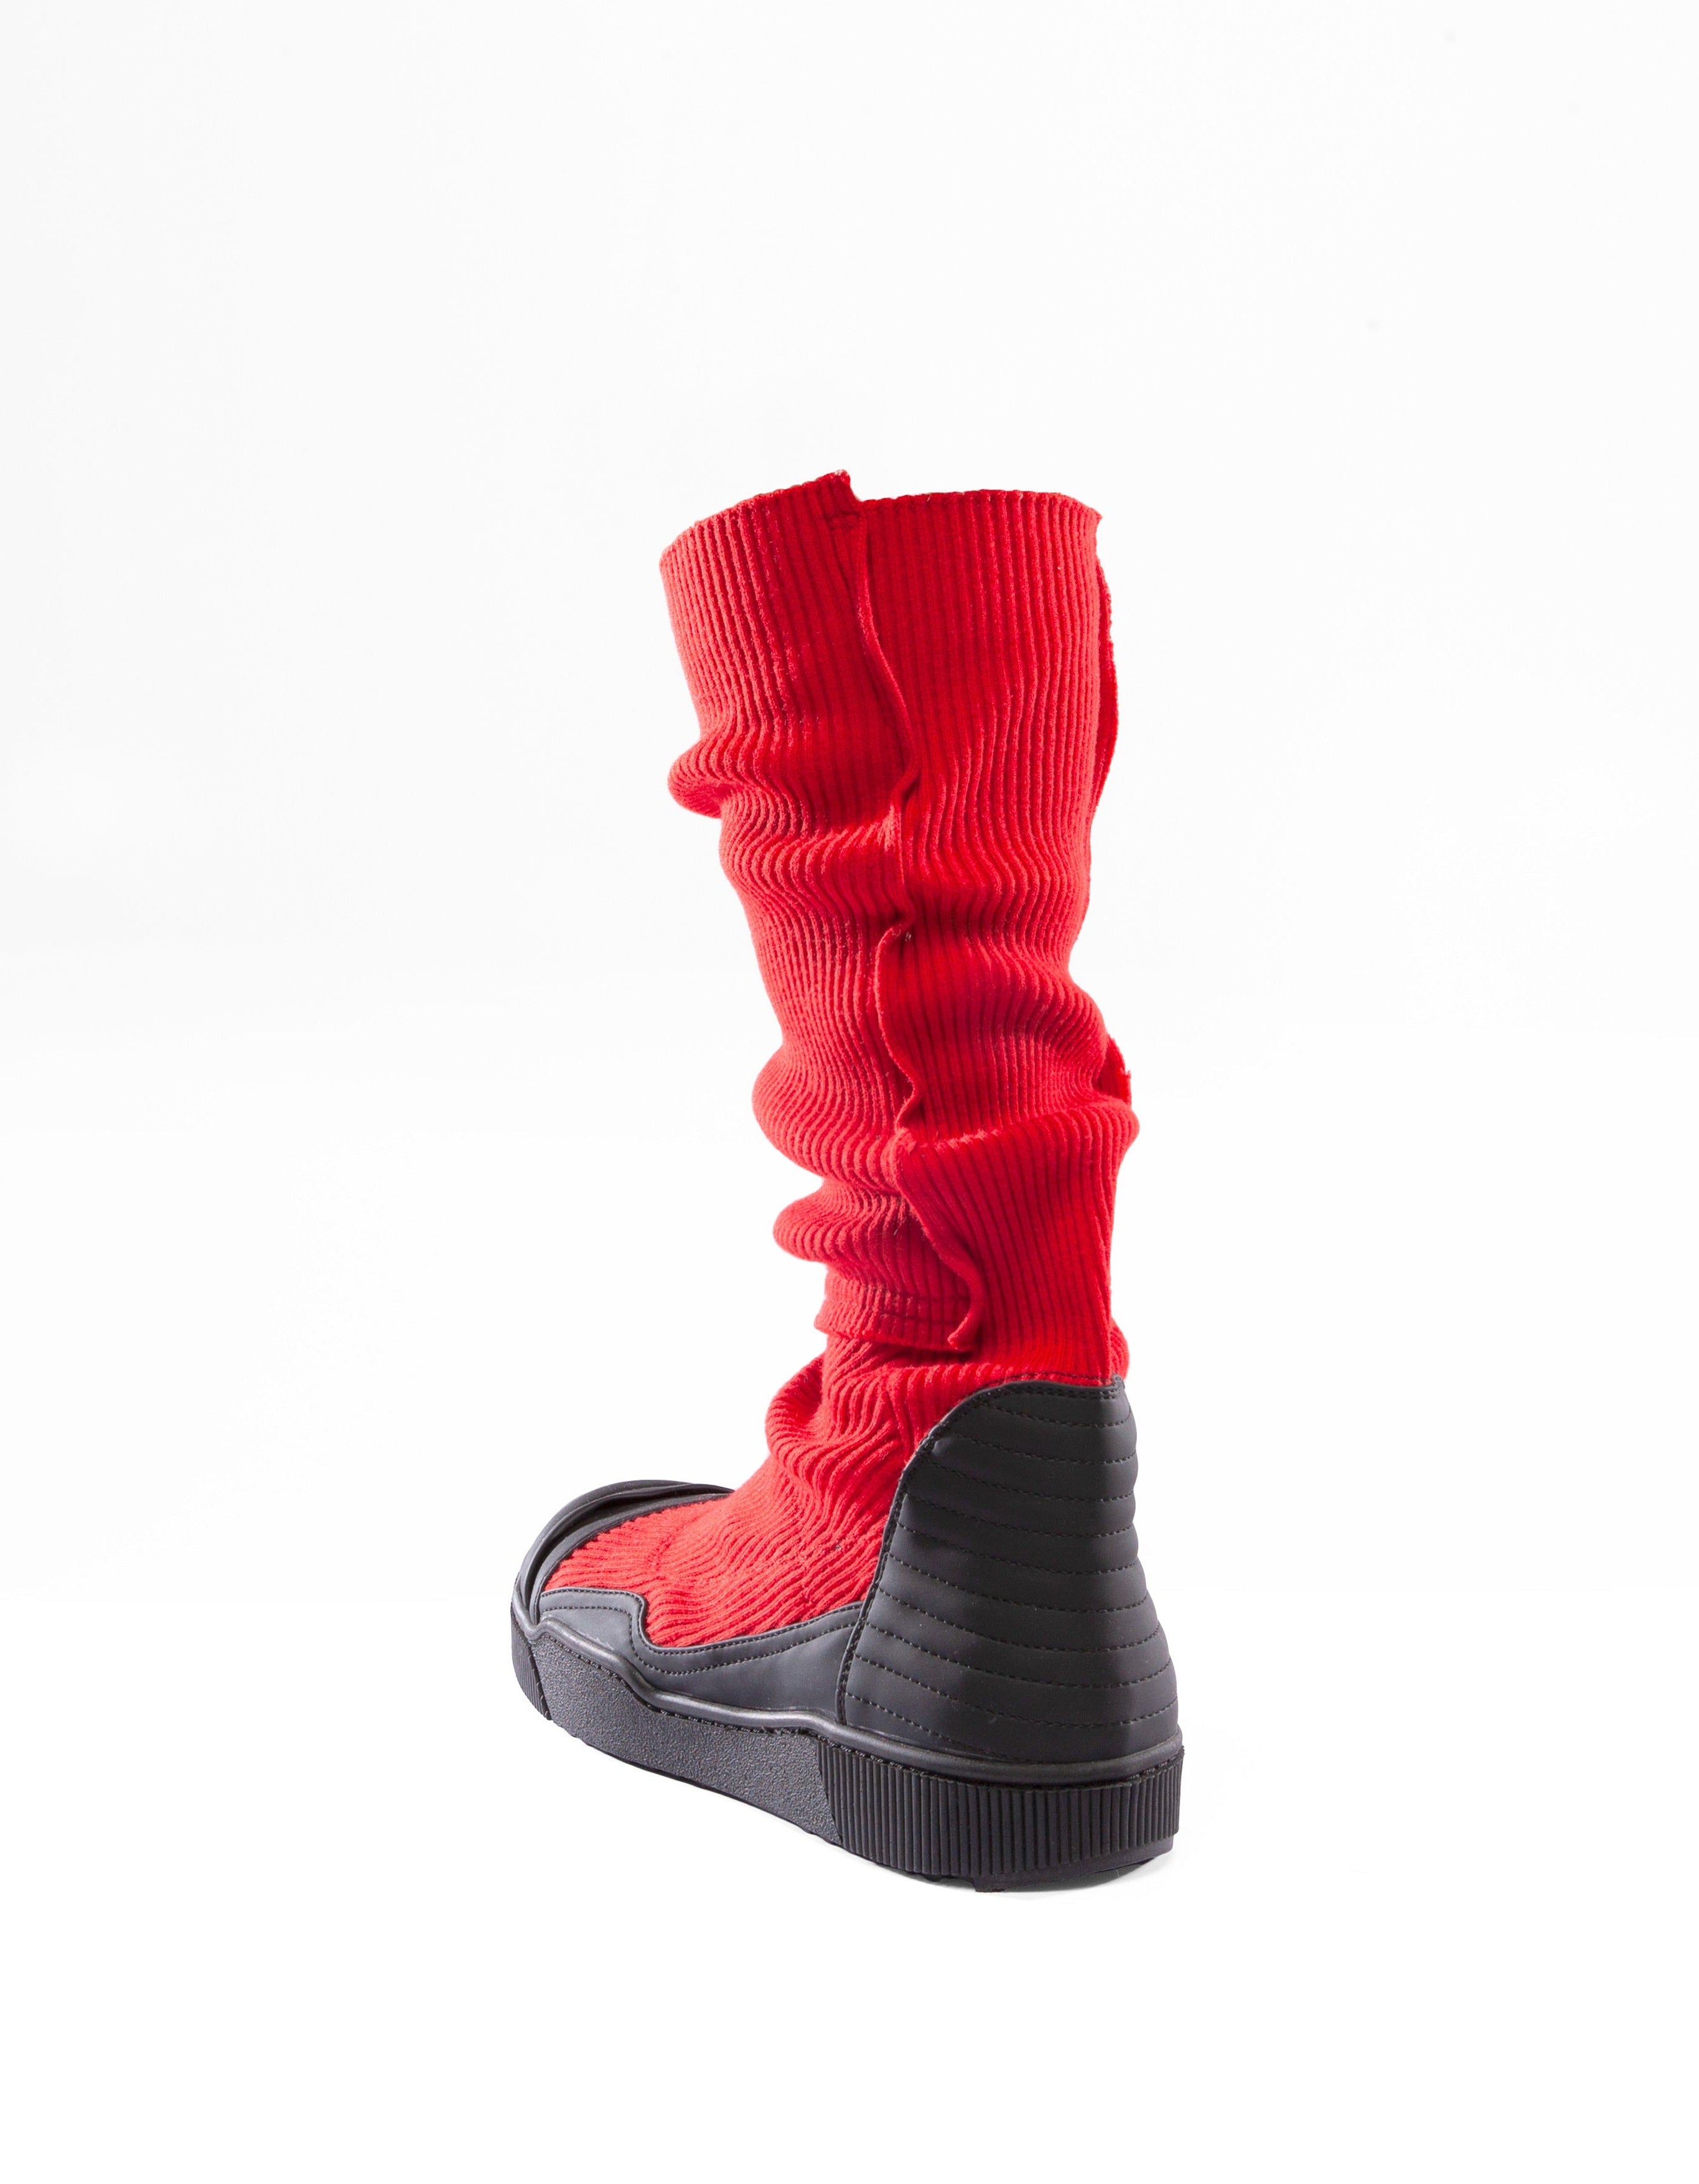 RIB BOOTS RED M